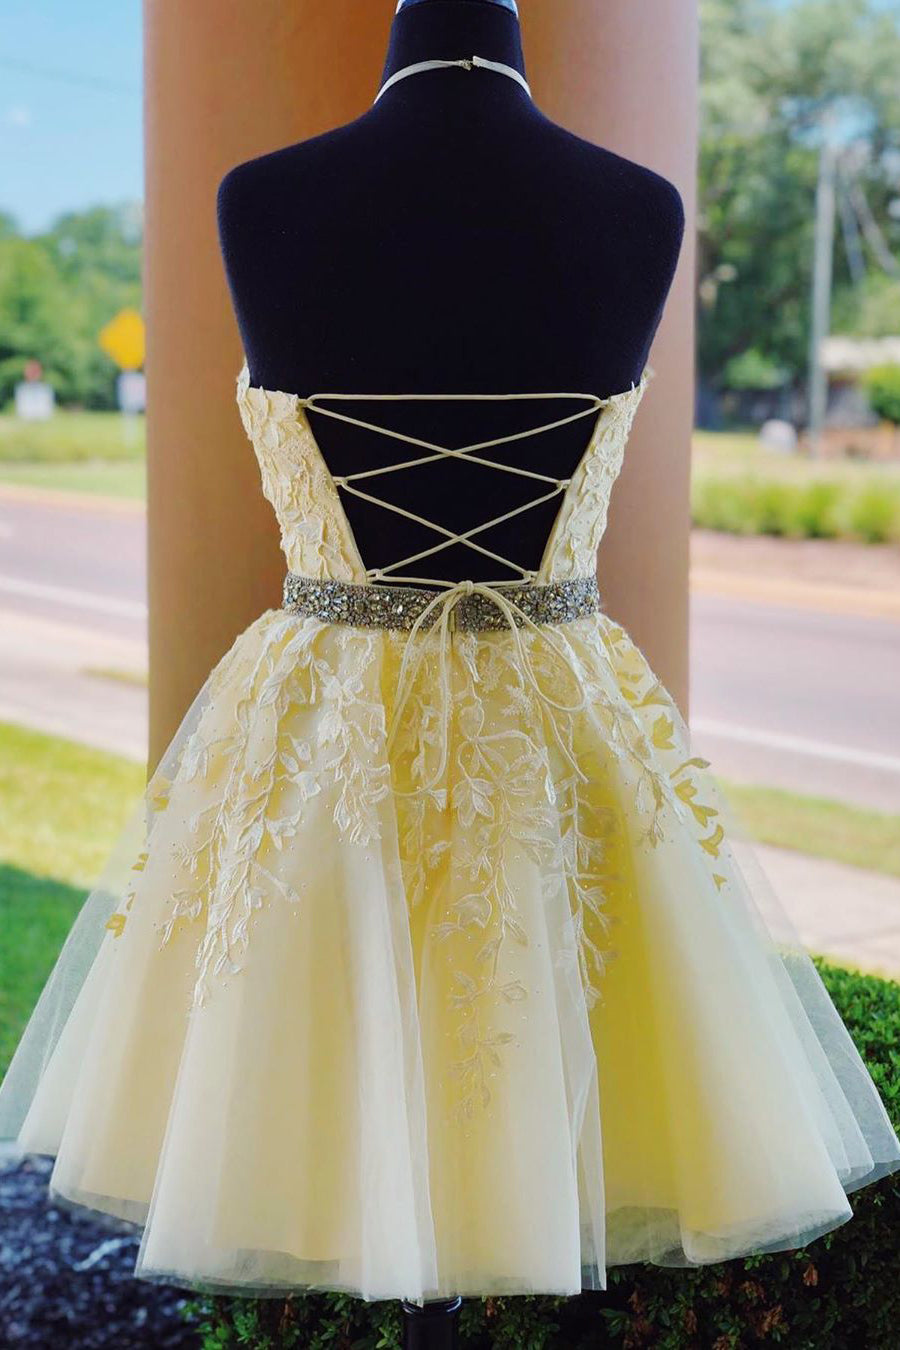 Lace Homecoming Dress Halter Neckline, Short Prom Dress ,Winter Formal Dress, Pageant Dance Dresses, Back To School Party Gown, PC0675